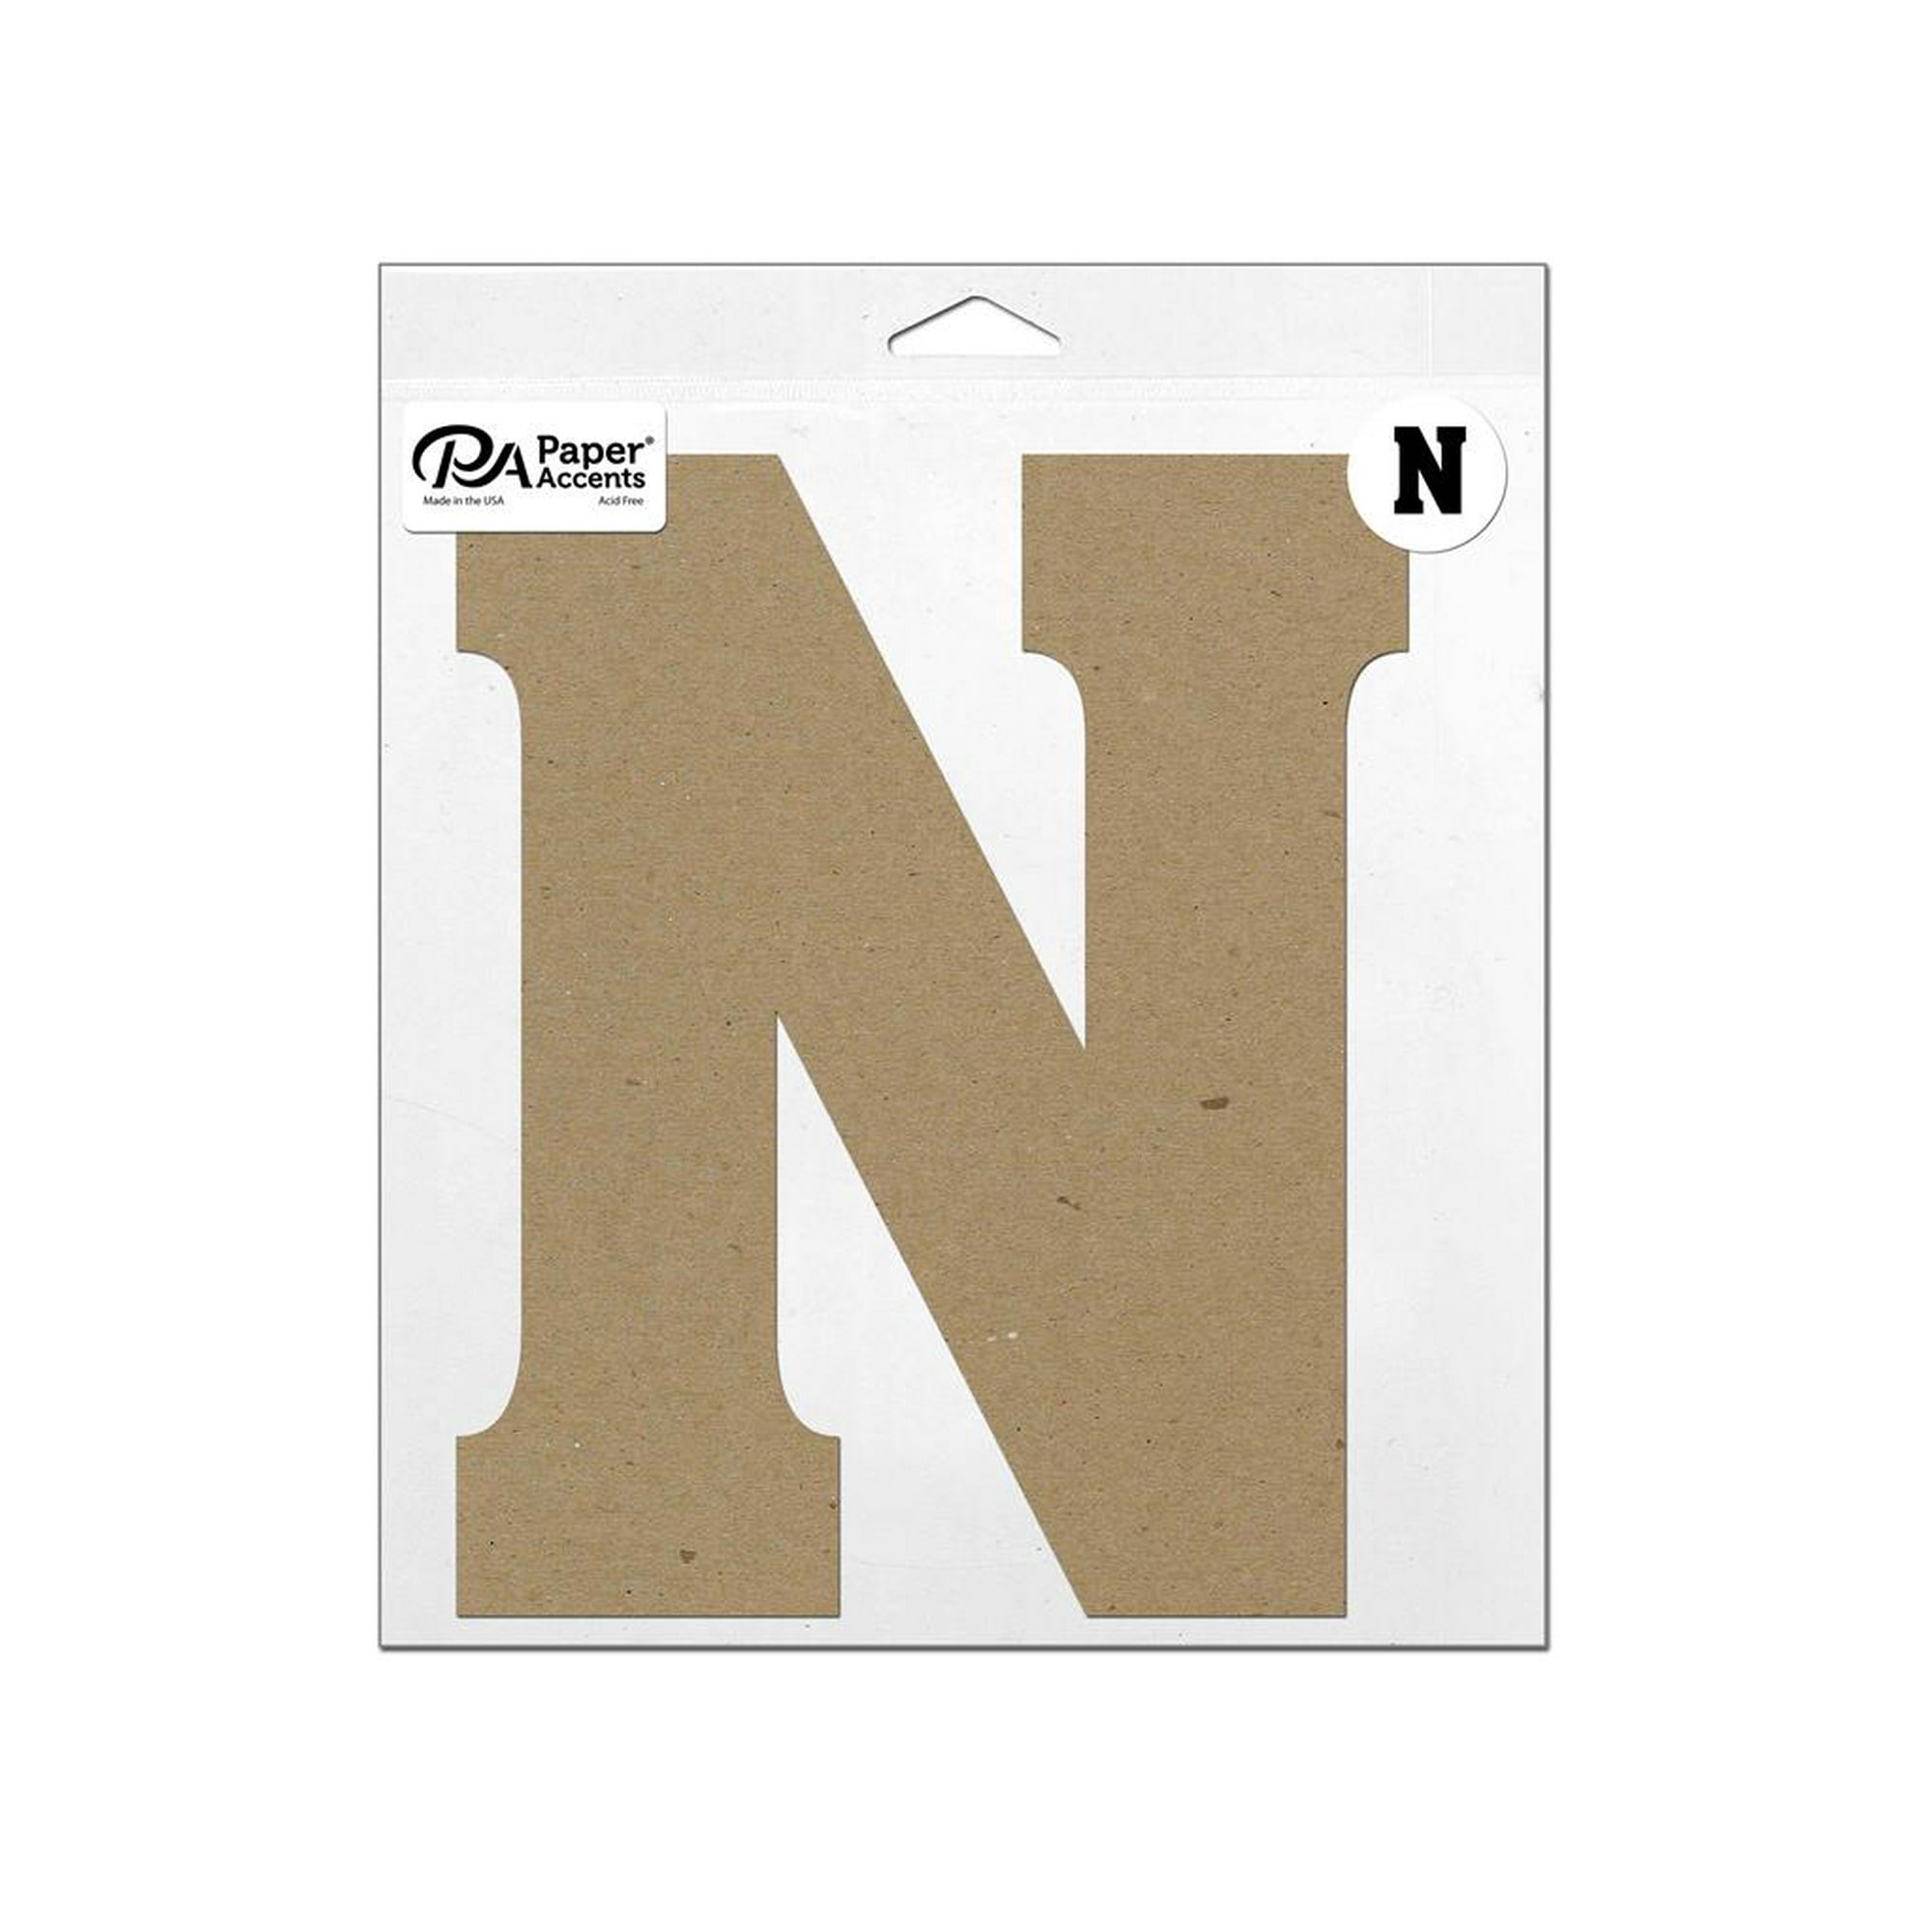 PAPER ACCENTS ADP20 CHIPBOARD LETTER 20 N 20PC NATURAL   Walmart ...